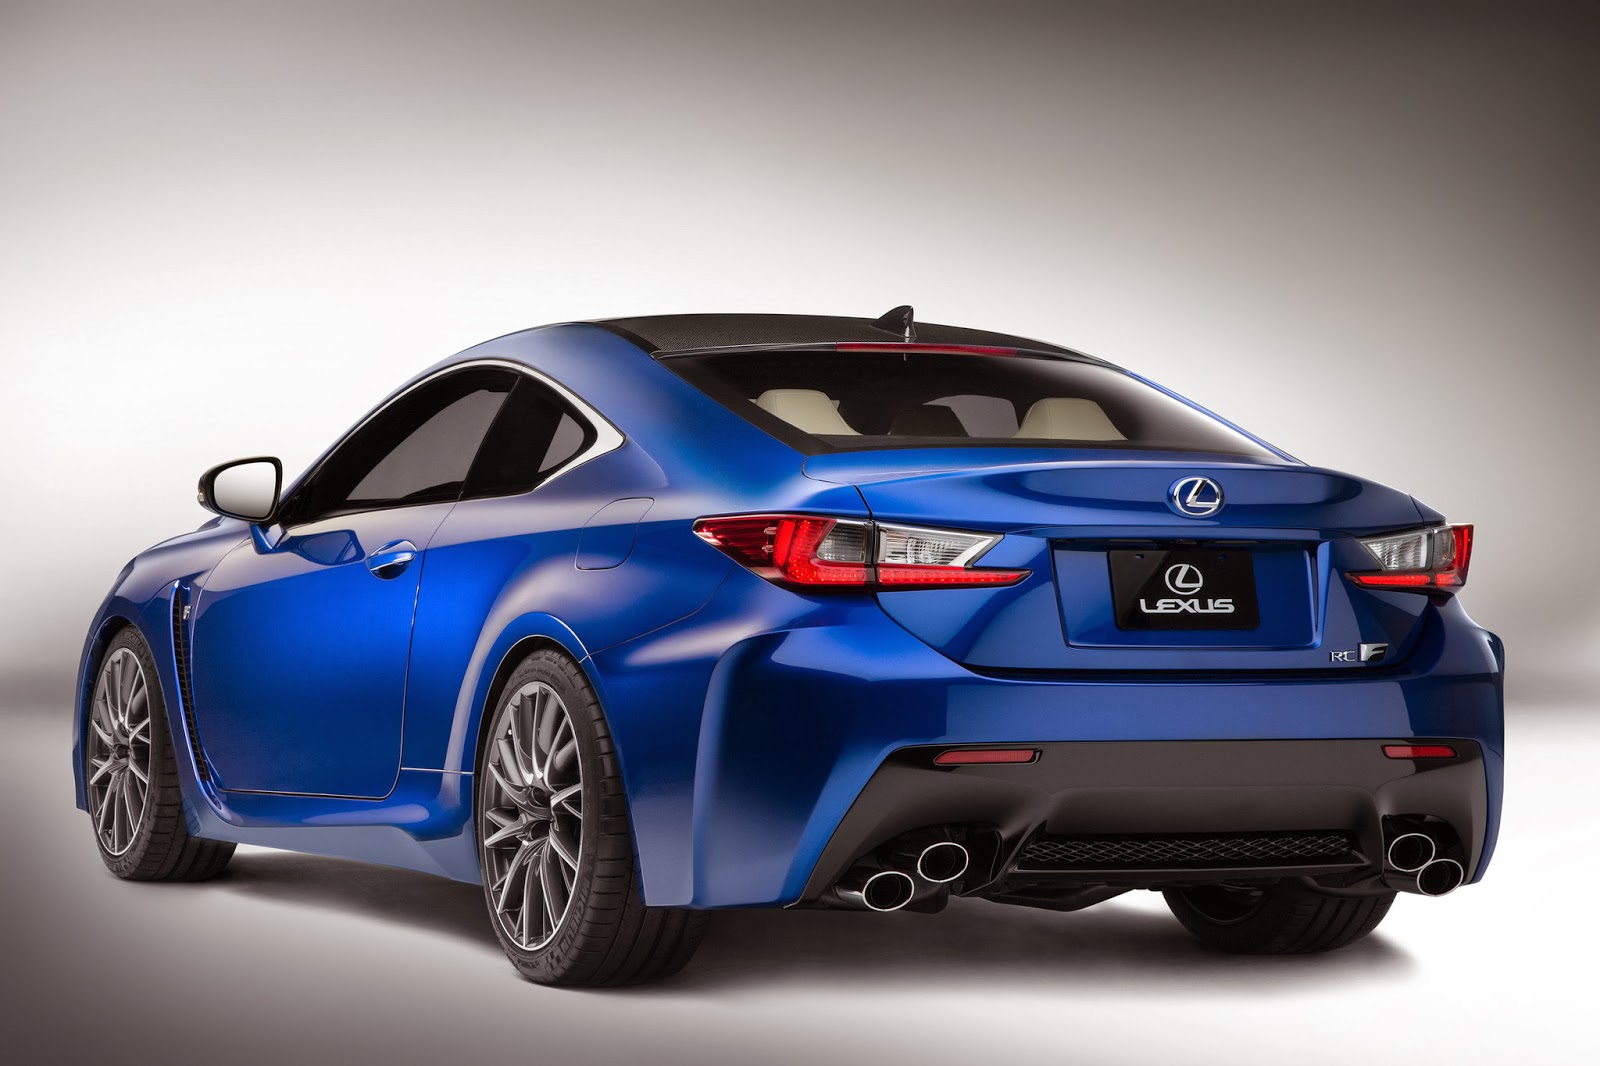 2015 Lexus RC F - Review and Design wallpaper